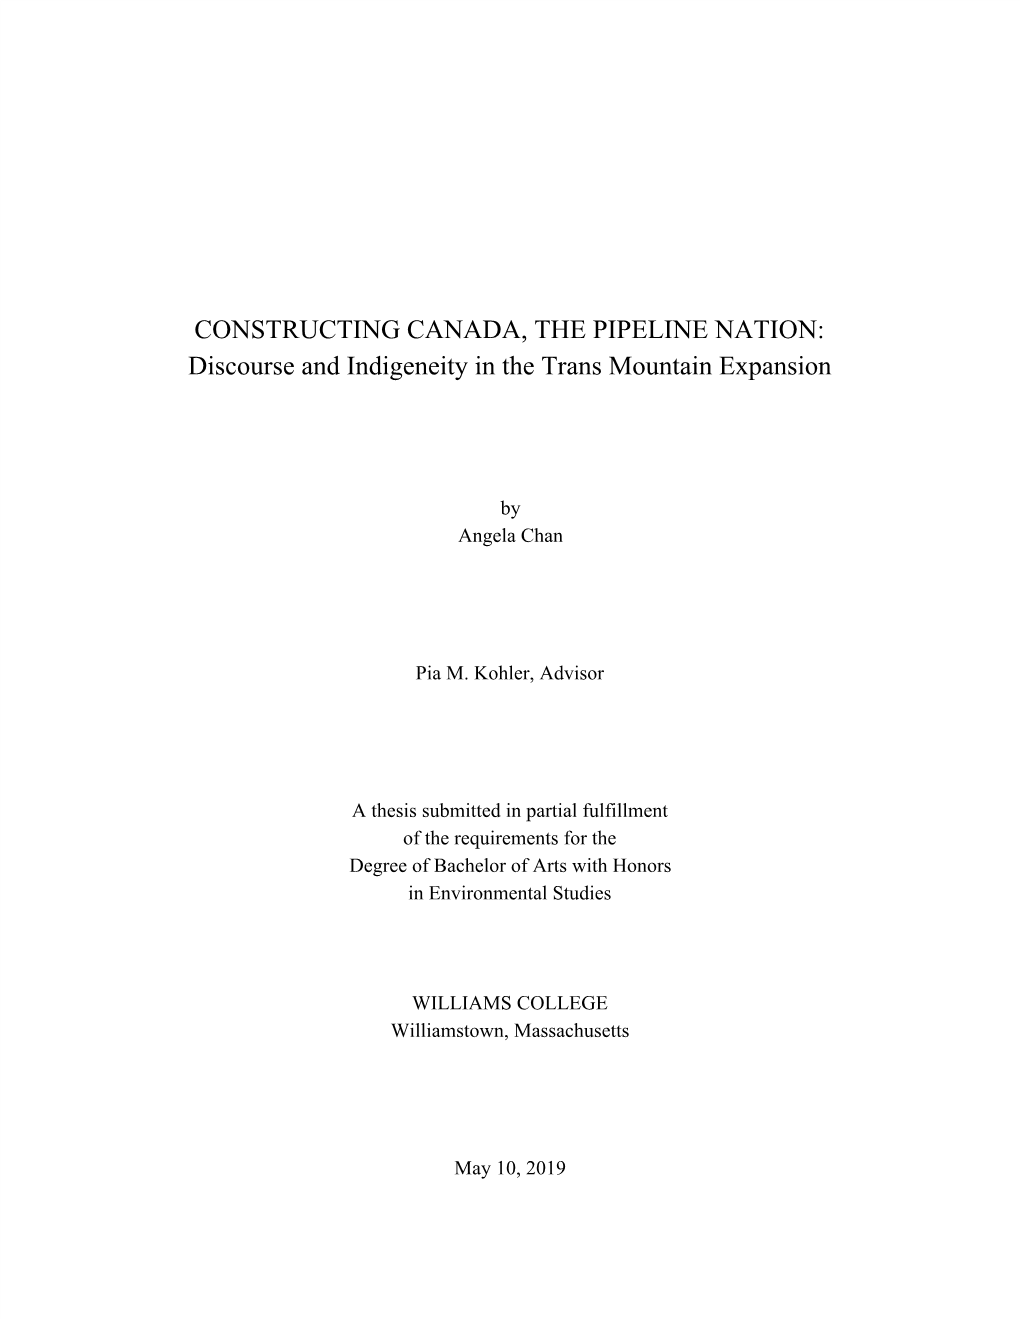 CONSTRUCTING CANADA, the PIPELINE NATION: Discourse and Indigeneity in the Trans Mountain Expansion